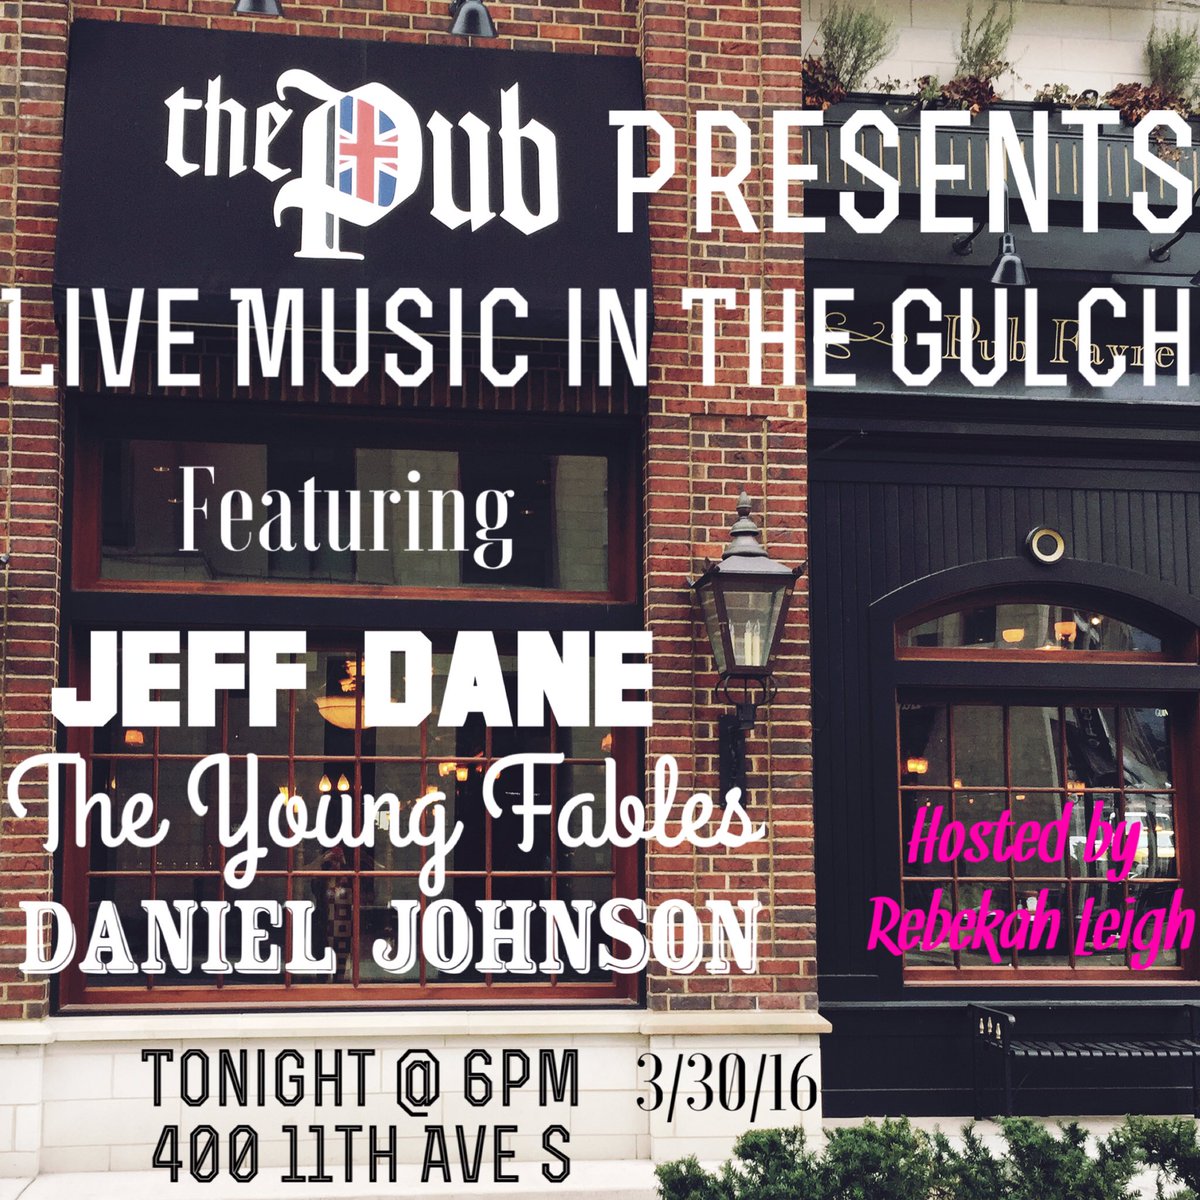 Here's the lineup for tomorrow night at #ThePubNashville. Come join us in #TheGulch for #LiveMusic. #MusicCity